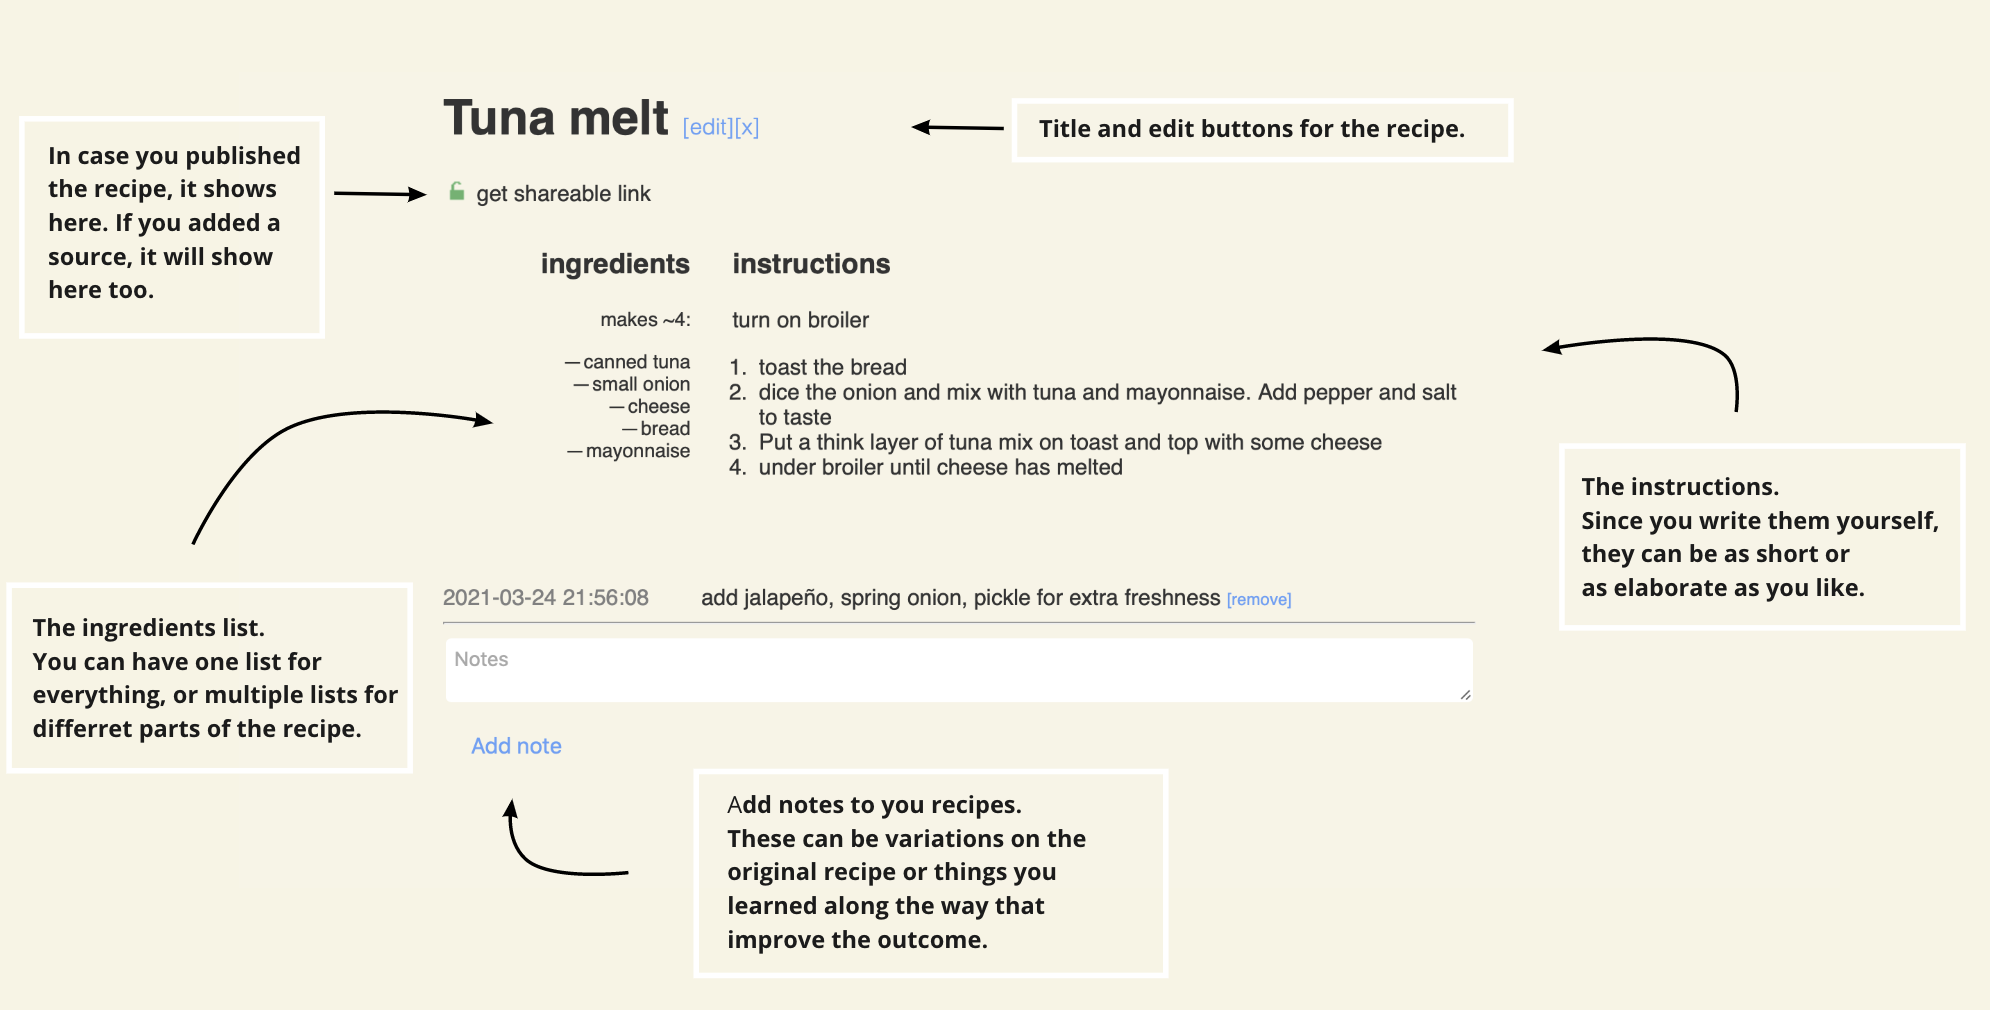 Preview of a recipe with some annotations.